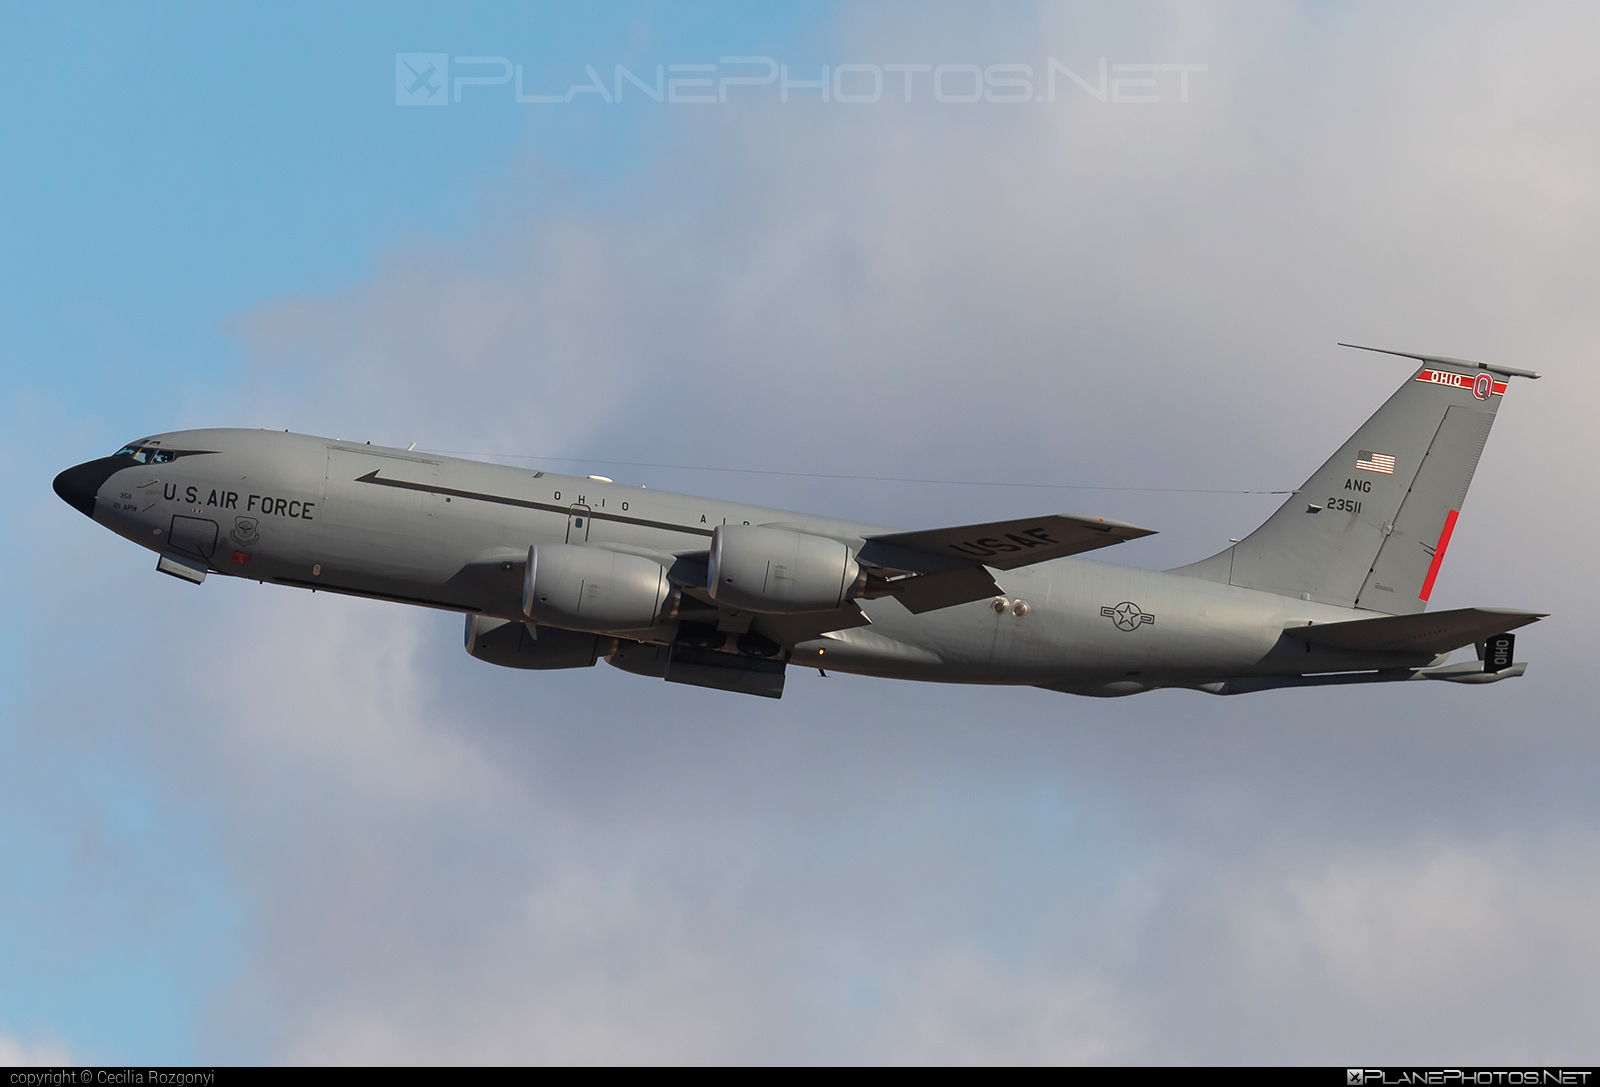 Boeing KC-135R Stratotanker - 62-3511 operated by US Air Force (USAF) #boeing #kc135 #kc135r #kc135stratotanker #stratotanker #usaf #usairforce